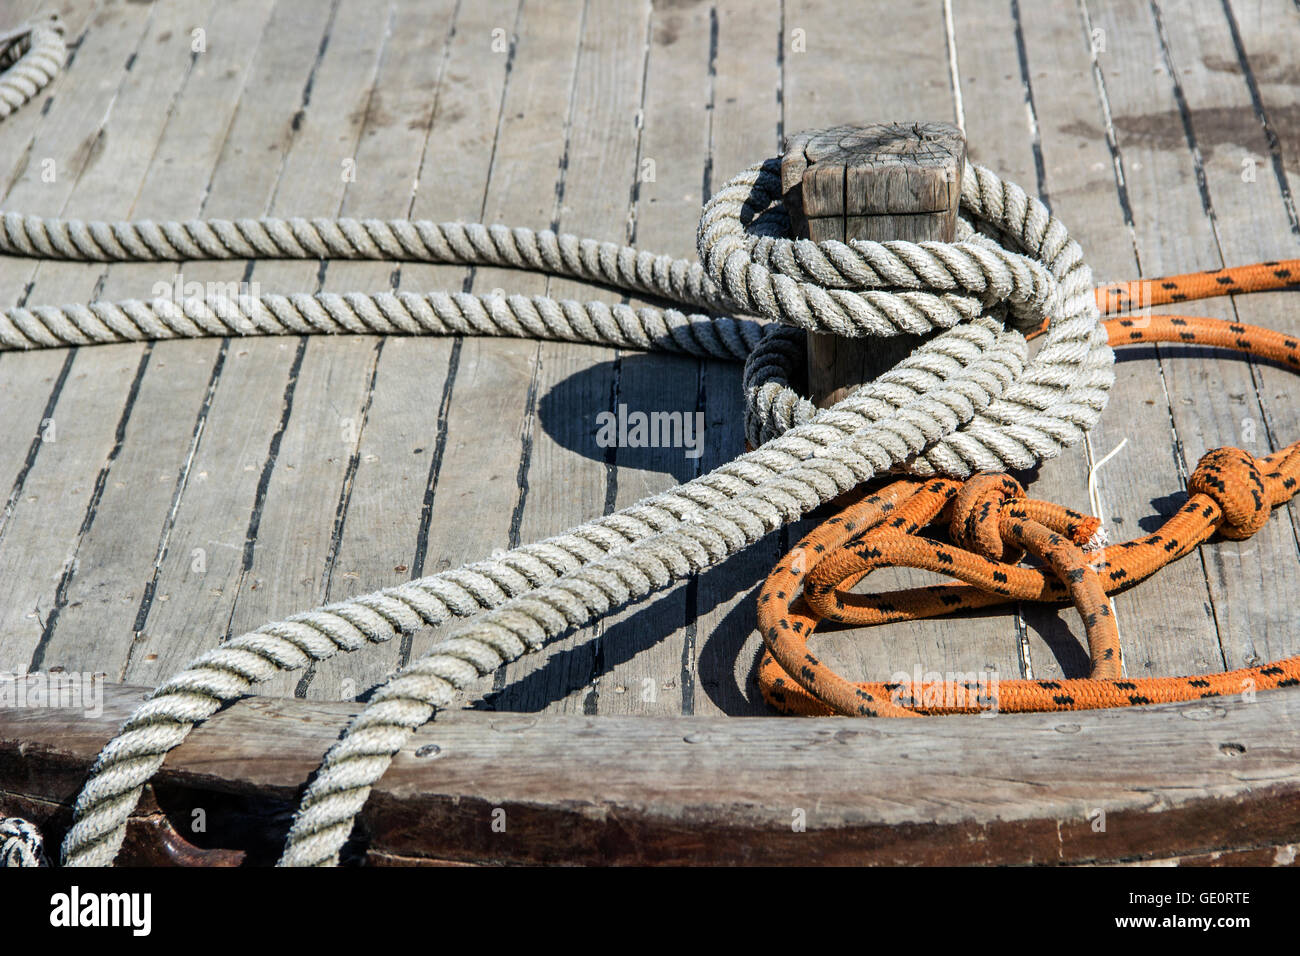 Budva harbor, Montenegro - Mooring ropes on a deck of the traditional wooden fishing boat of the Adriatic Sea Stock Photo